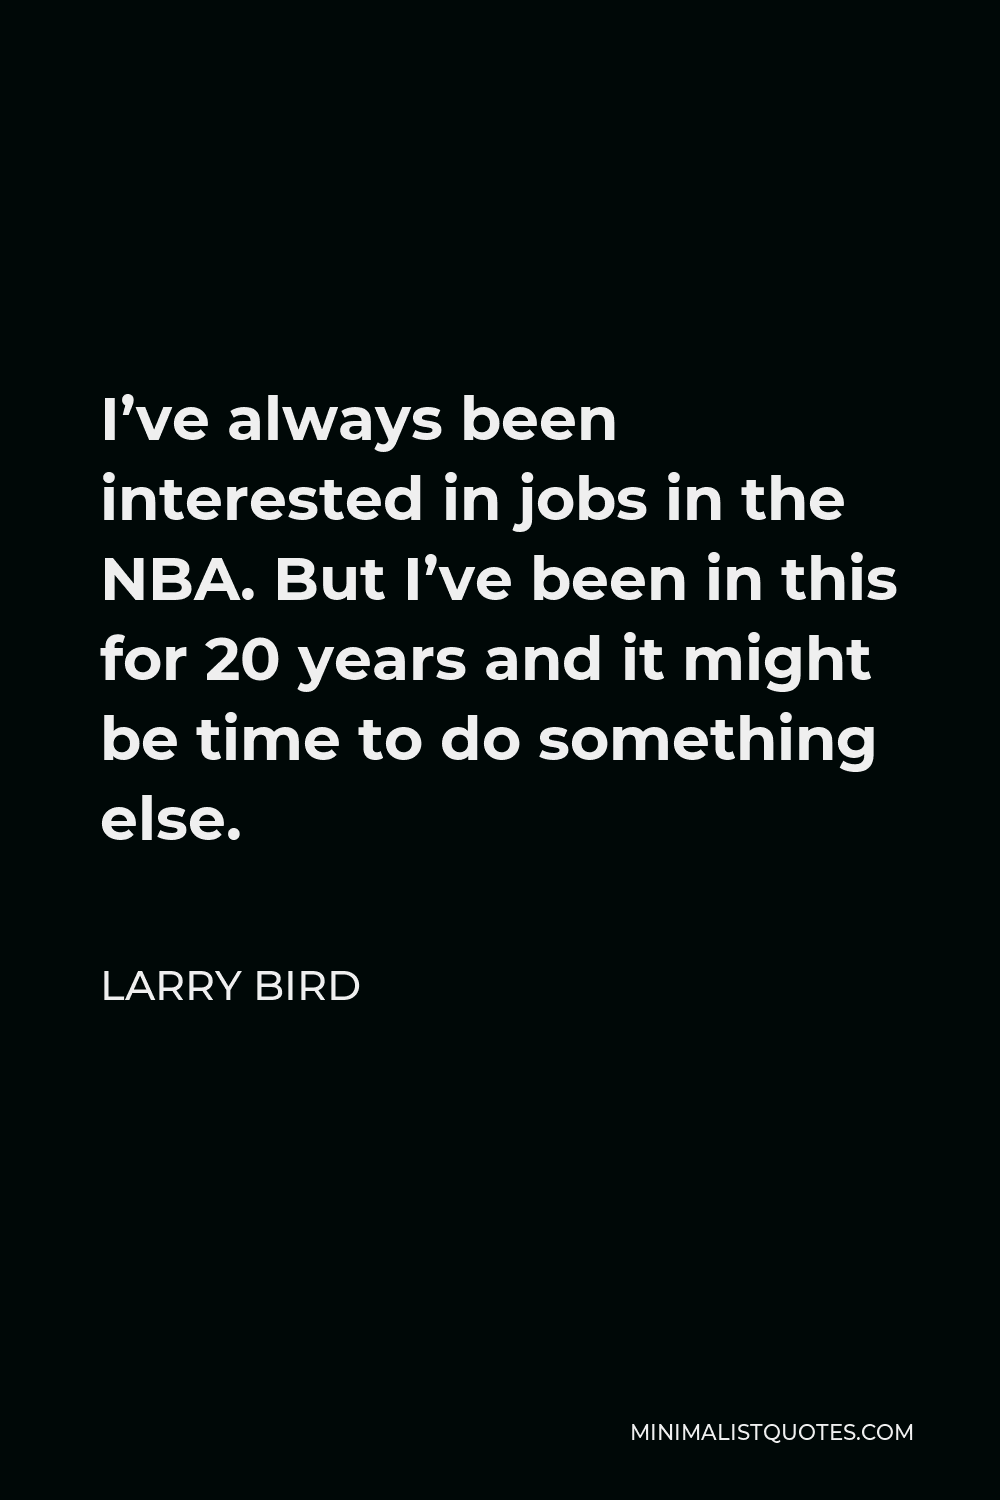 Larry Bird Quote - I’ve always been interested in jobs in the NBA. But I’ve been in this for 20 years and it might be time to do something else.